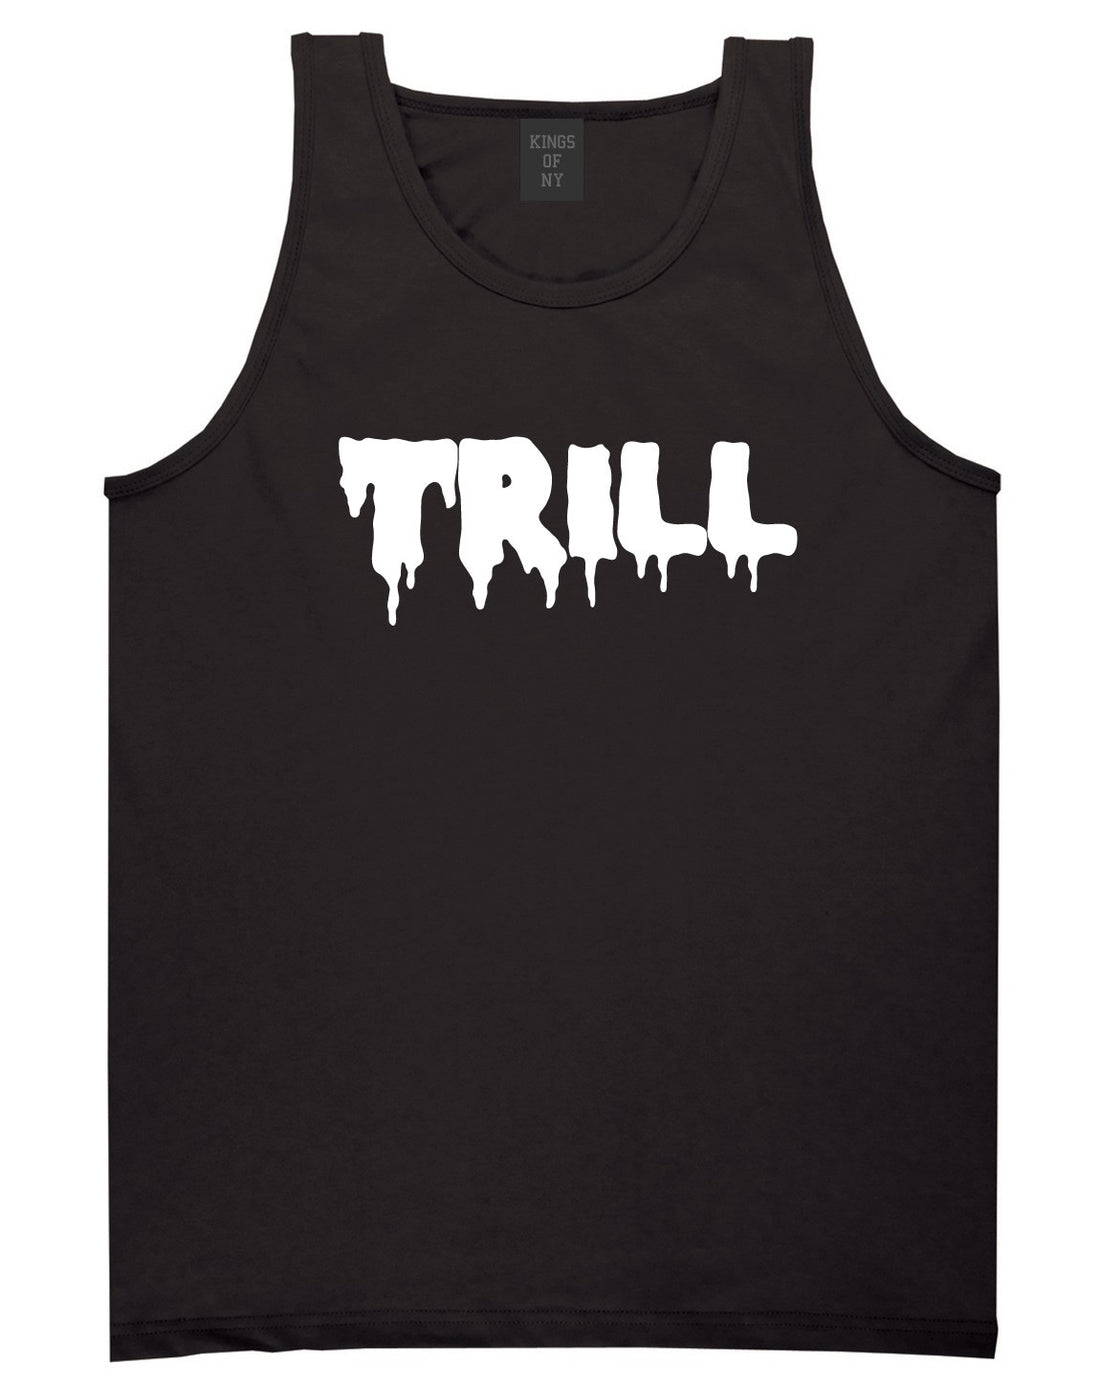 Trill Blood New York Bx Been Style Fashion Tank Top In Black by Kings Of NY